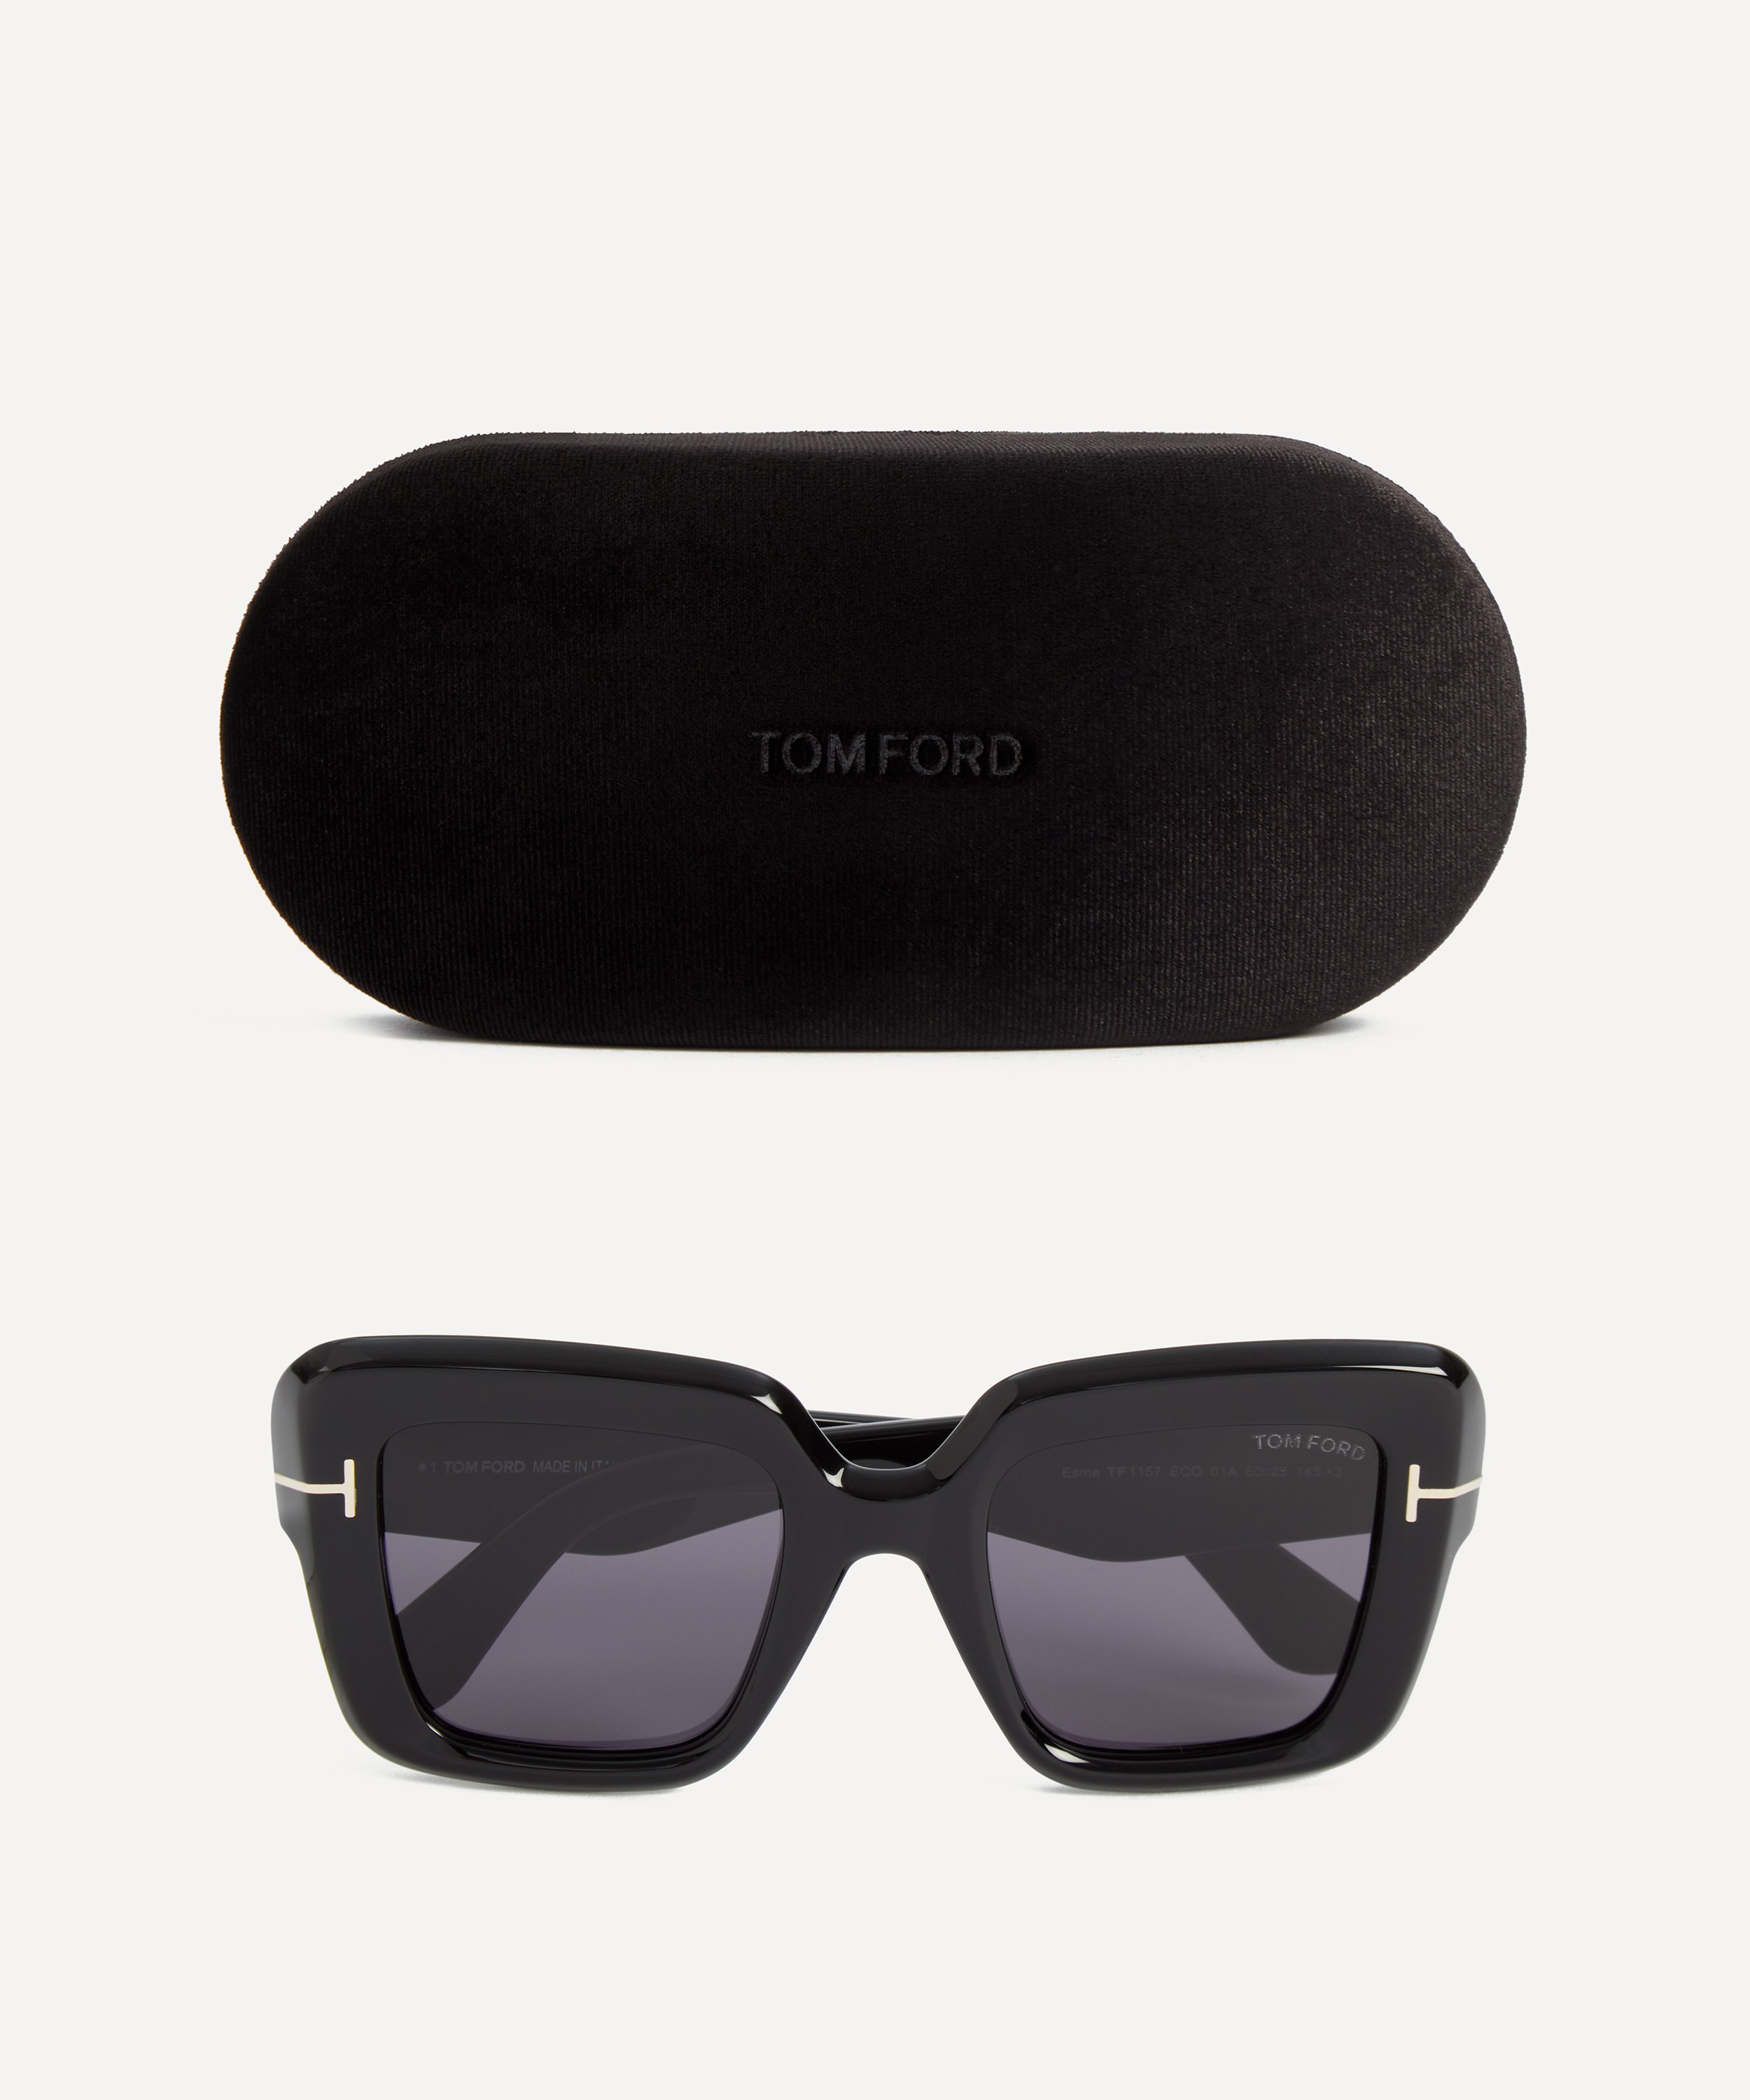 Tom Ford - Fausto Square Sunglasses image number 3